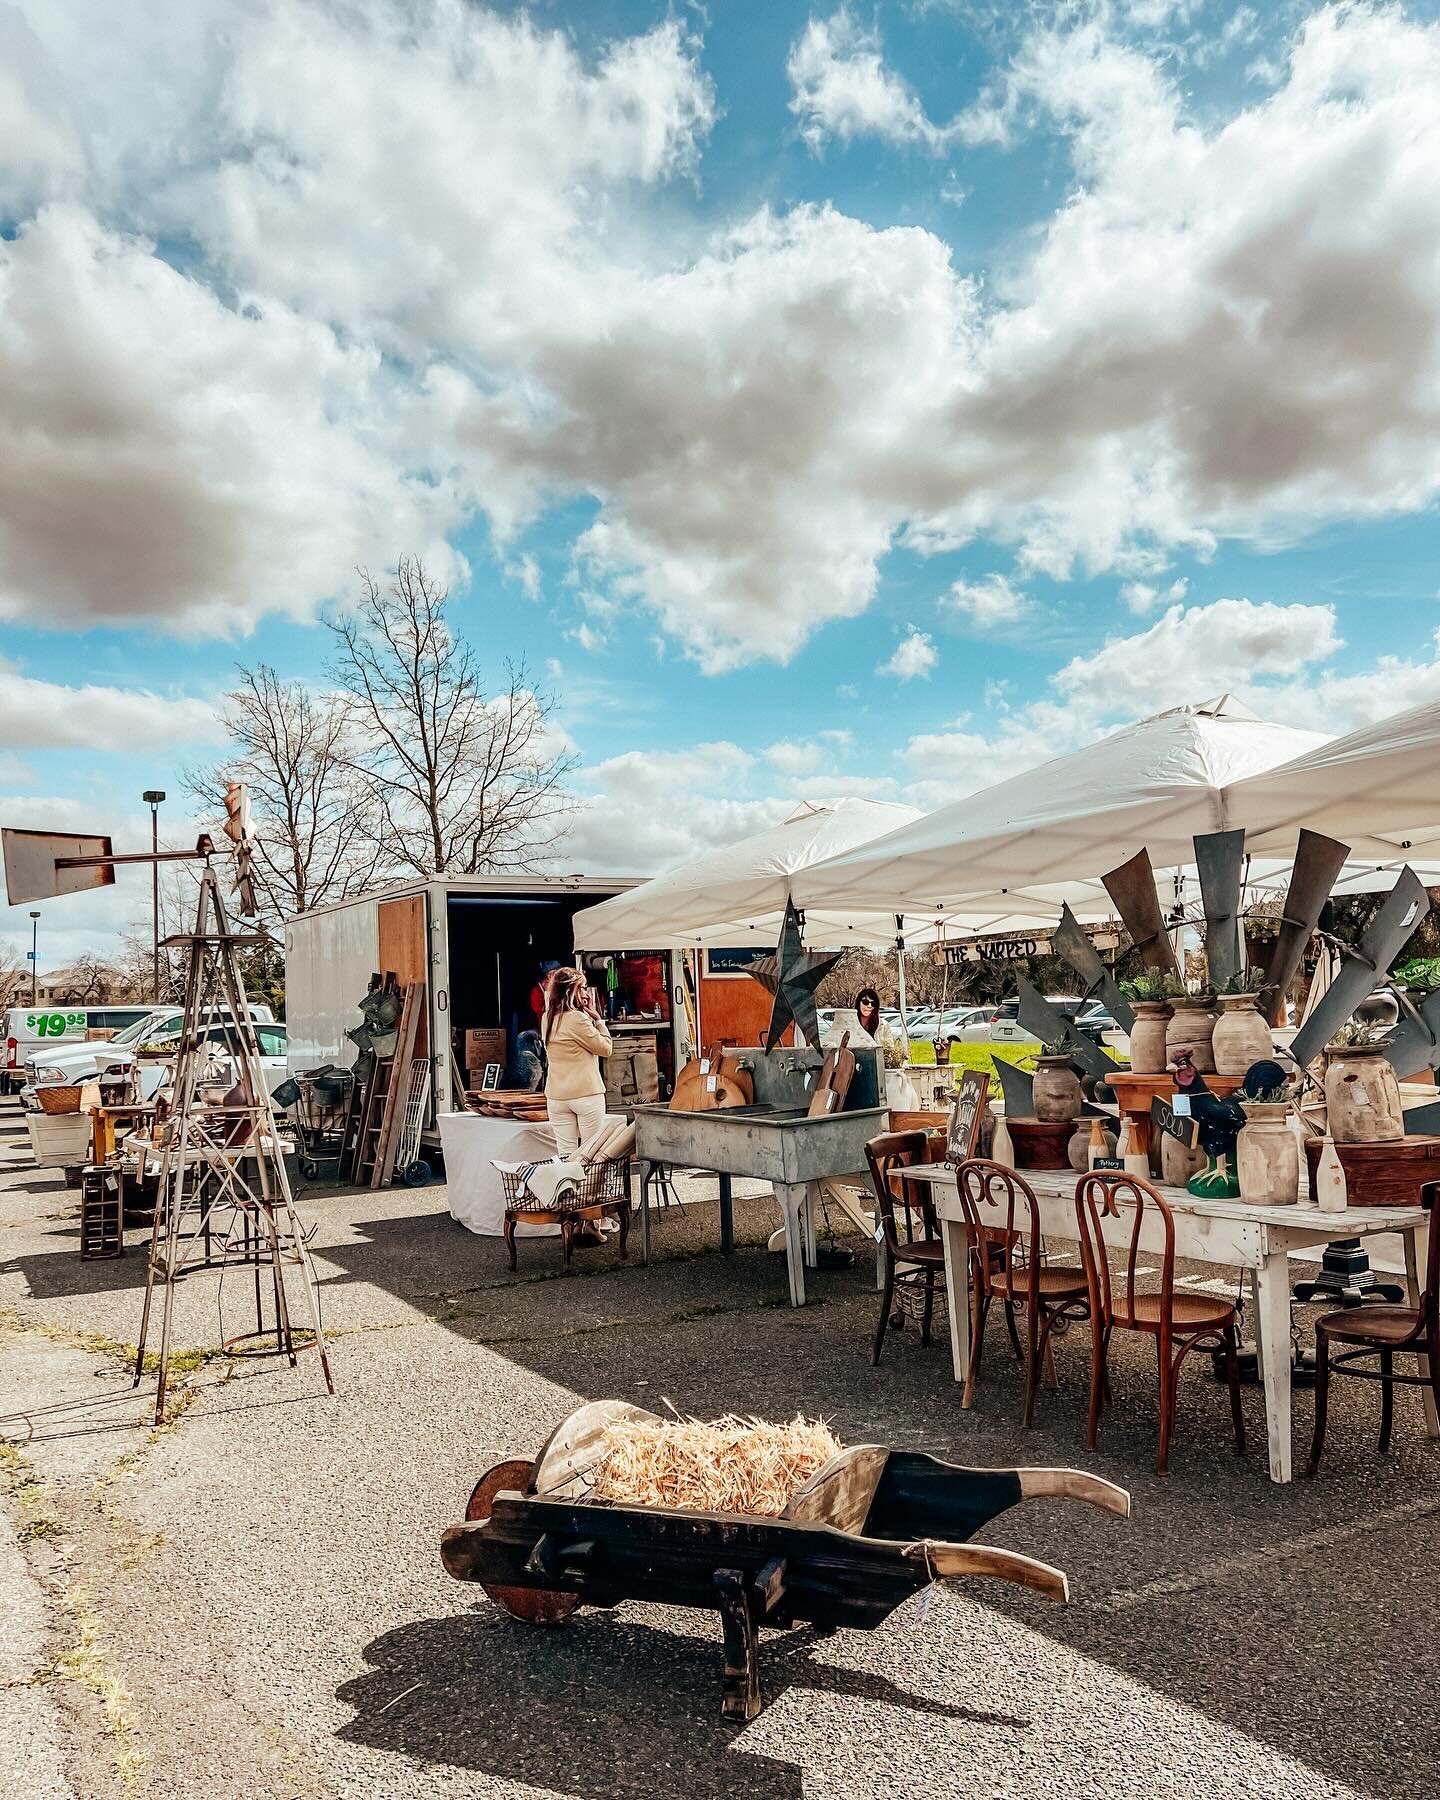 The second Sunday of every month ✨ 300+ incredible vendors selling antiques, collectibles, vintage, &amp; more. Ring in Spring with us on April 14th at Sleep Train Arena (via Truxel Road) from 6:30-3pm!